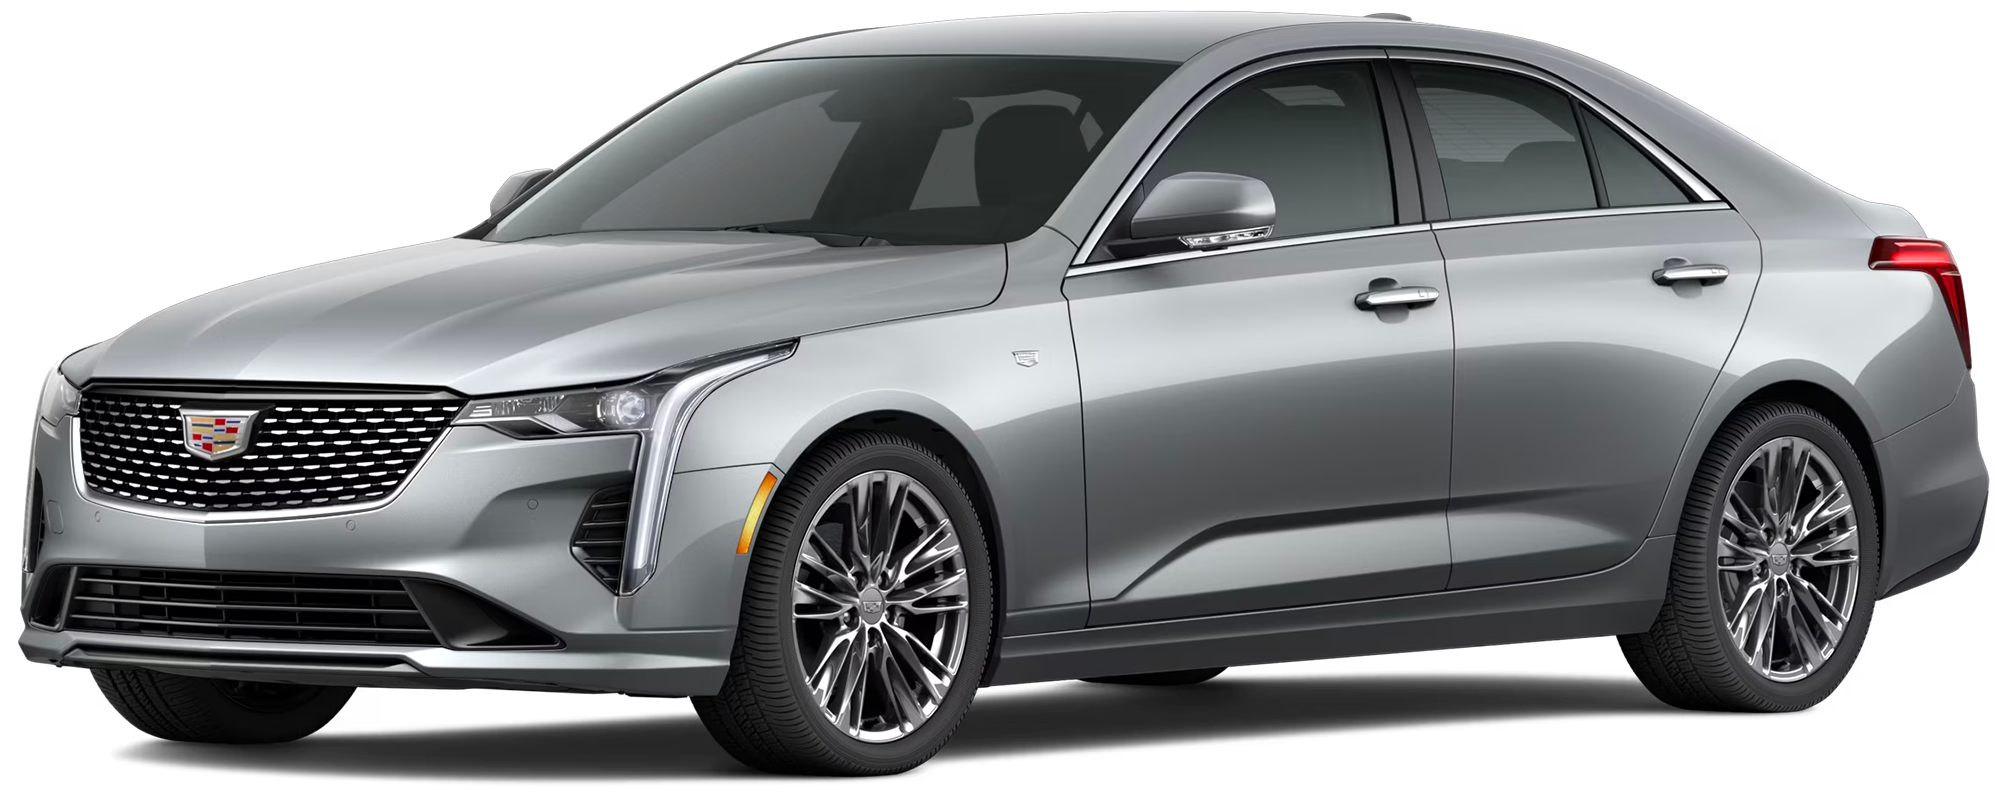 CADILLAC Incentives Rebates Specials In Austin TX CADILLAC Finance And Lease Deals Covert